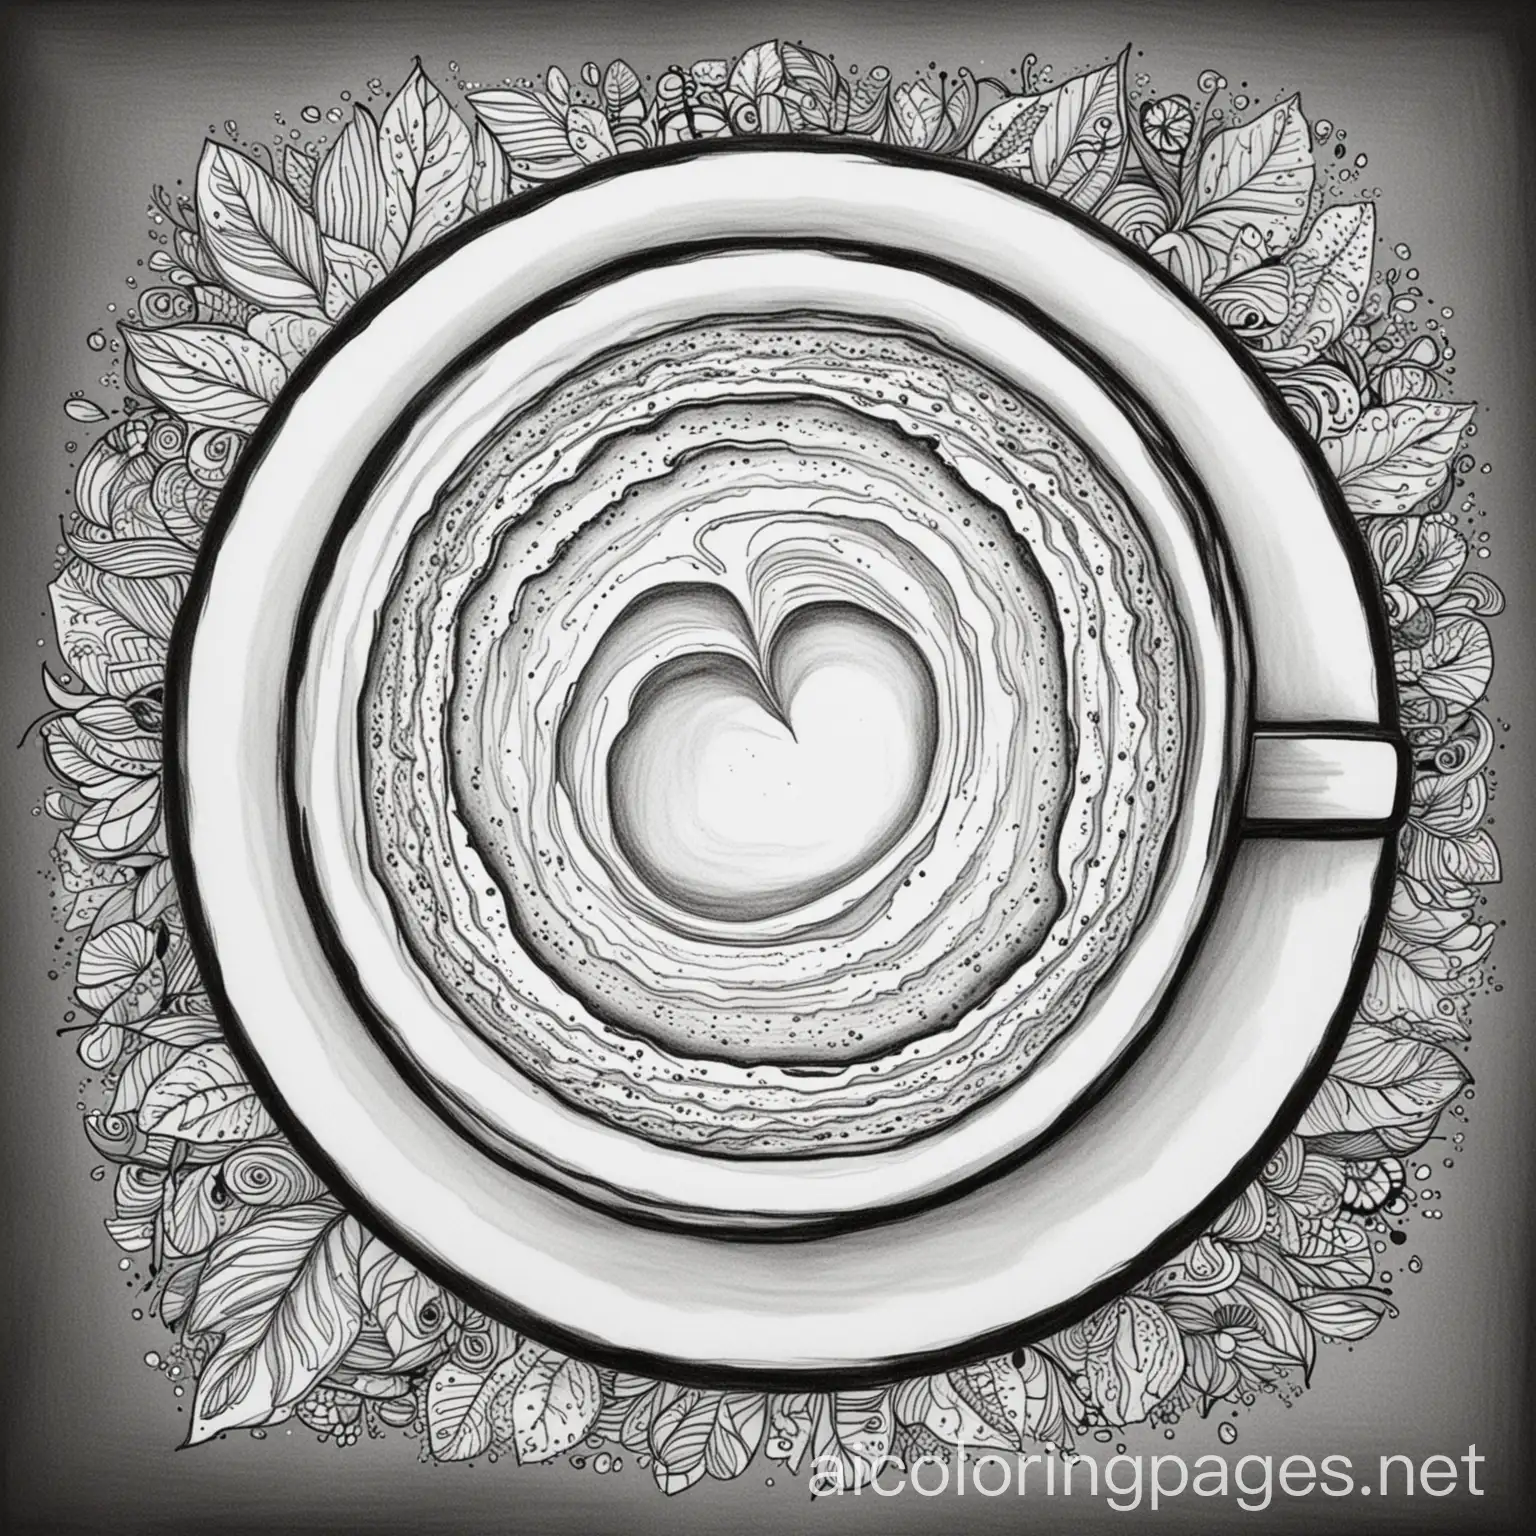 a black and white coloring page of a large cozy looking up of coffee with beautiful  coffee art on the surface of the coffee , Coloring Page, black and white, line art, white background, Simplicity, Ample White Space. The background of the coloring page is plain white to make it easy for young children to color within the lines. The outlines of all the subjects are easy to distinguish, making it simple for kids to color without too much difficulty 